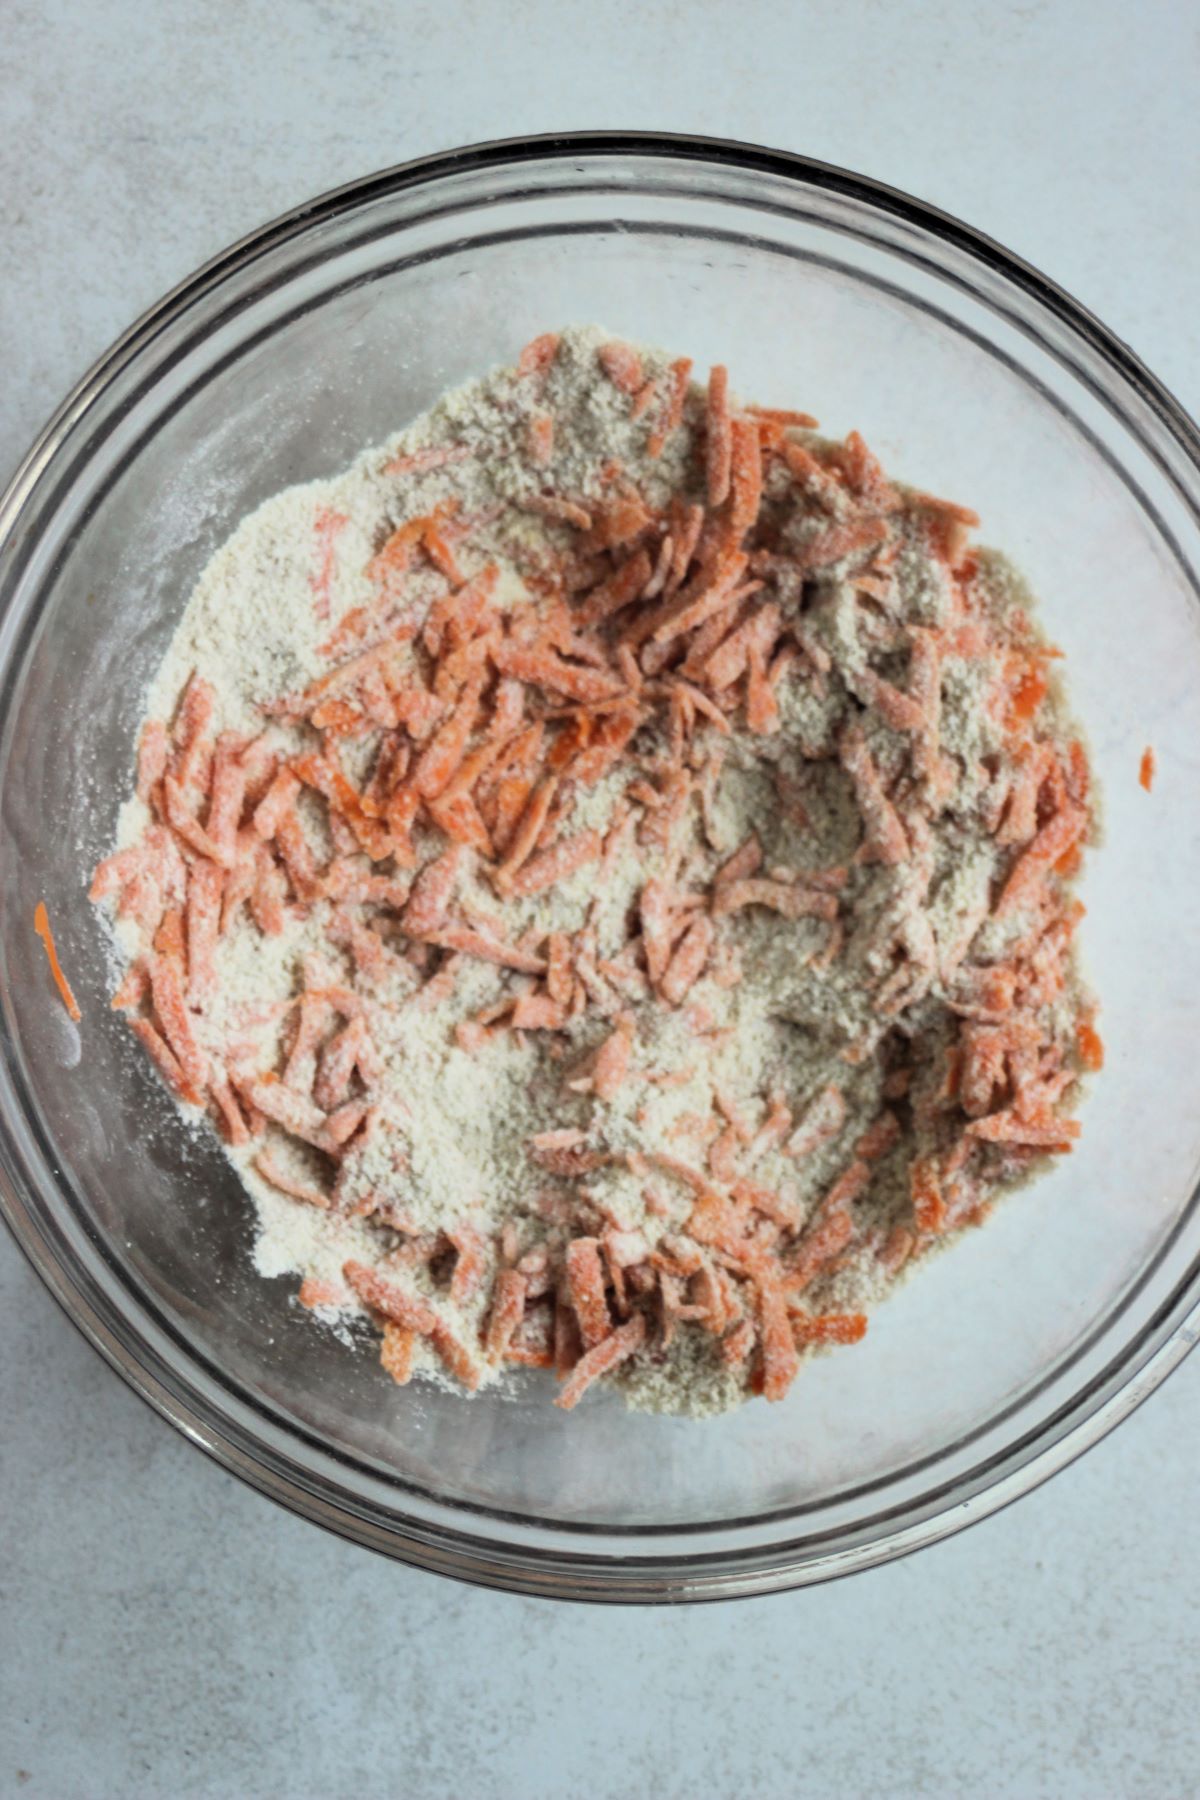 Glass bowl with a flour mixture and grated carrots.